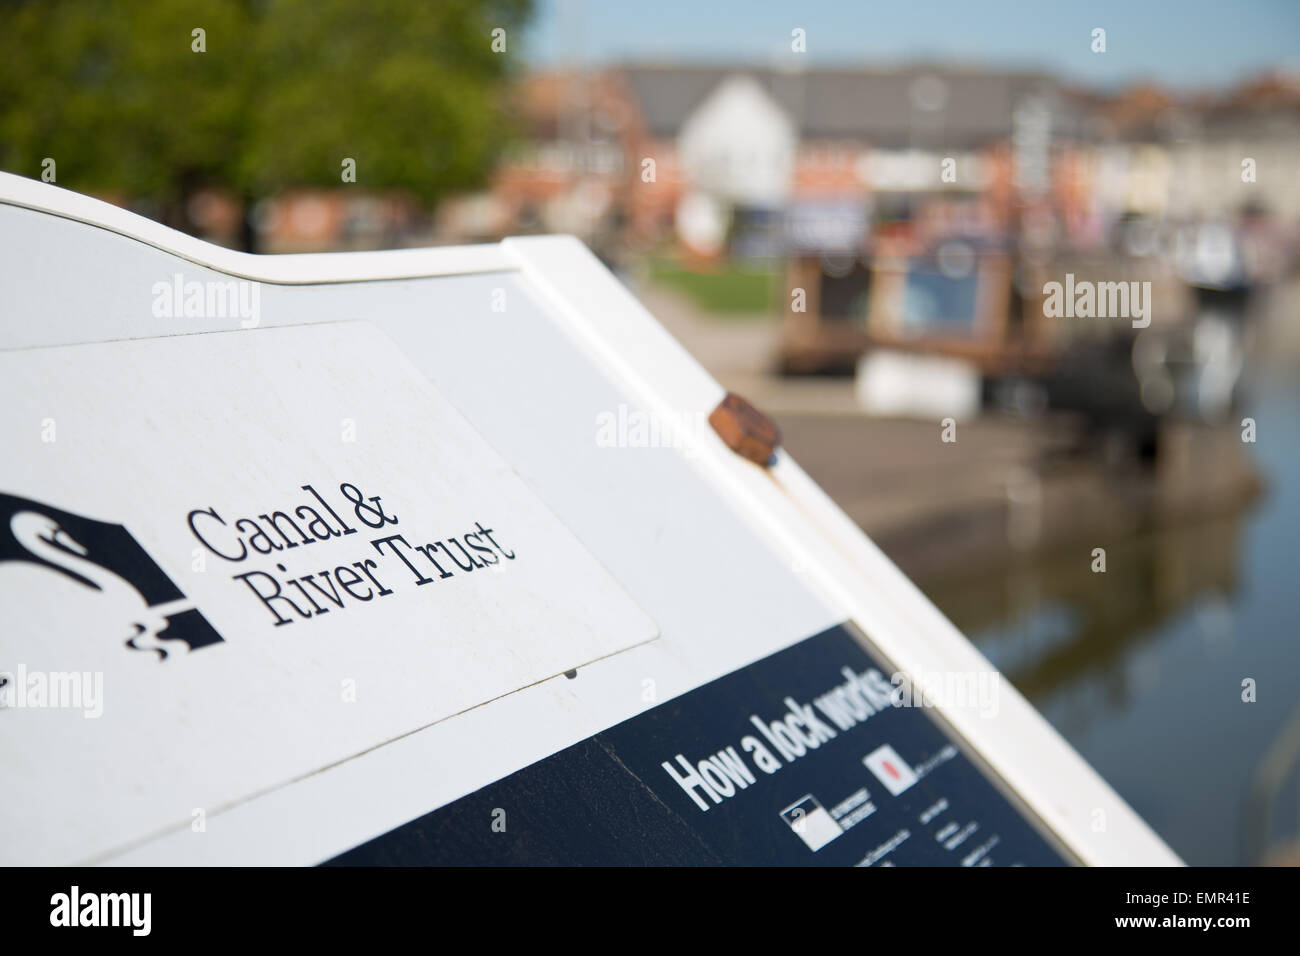 Canal & River Trust sign by the river avon in stratford upon avon Stock Photo